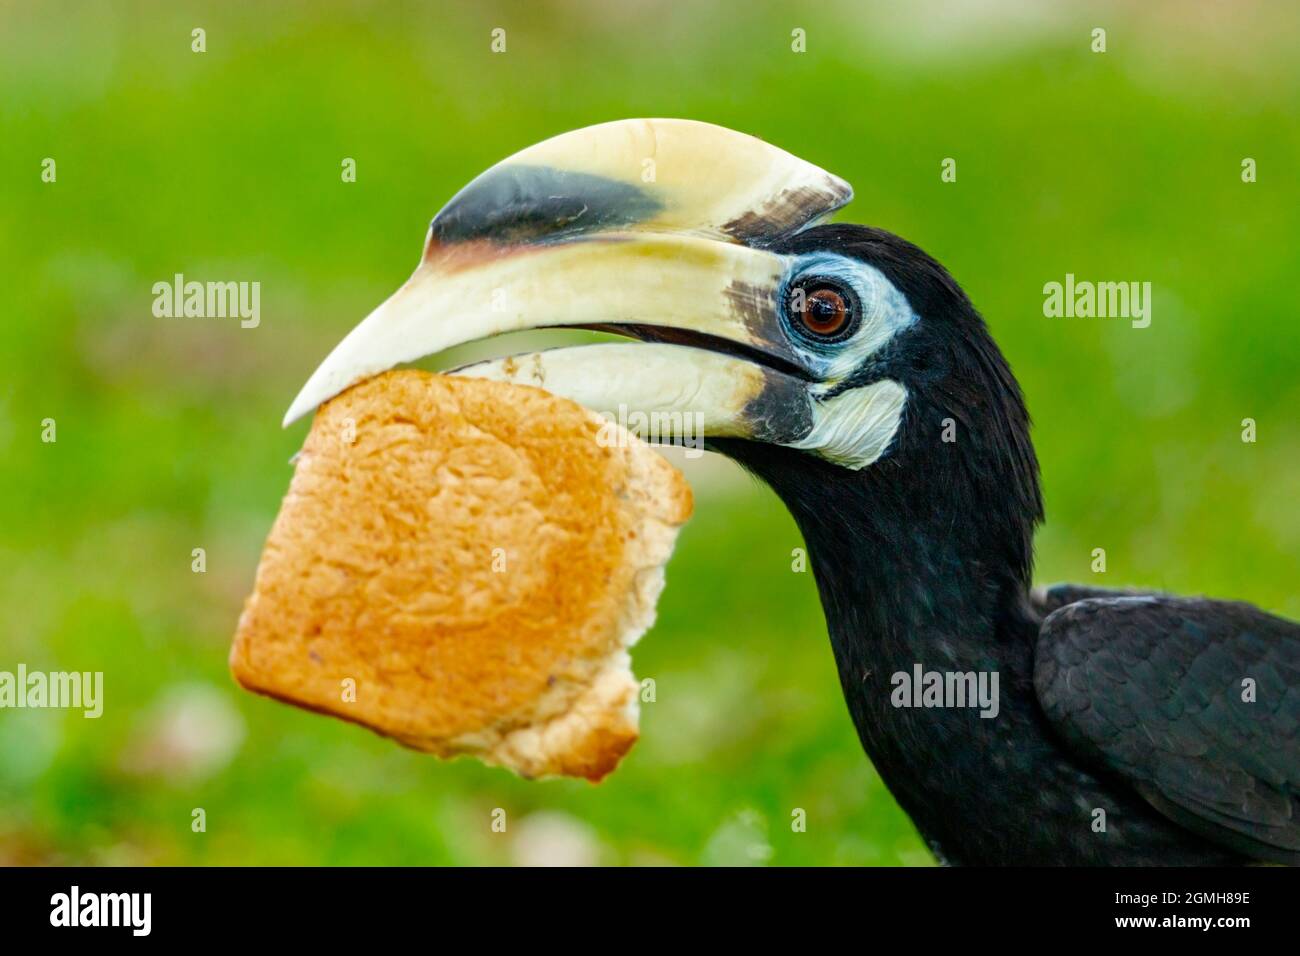 A male Oriental Pied Hornbill picks up a slice of bread left on the grass, Singapore Stock Photo